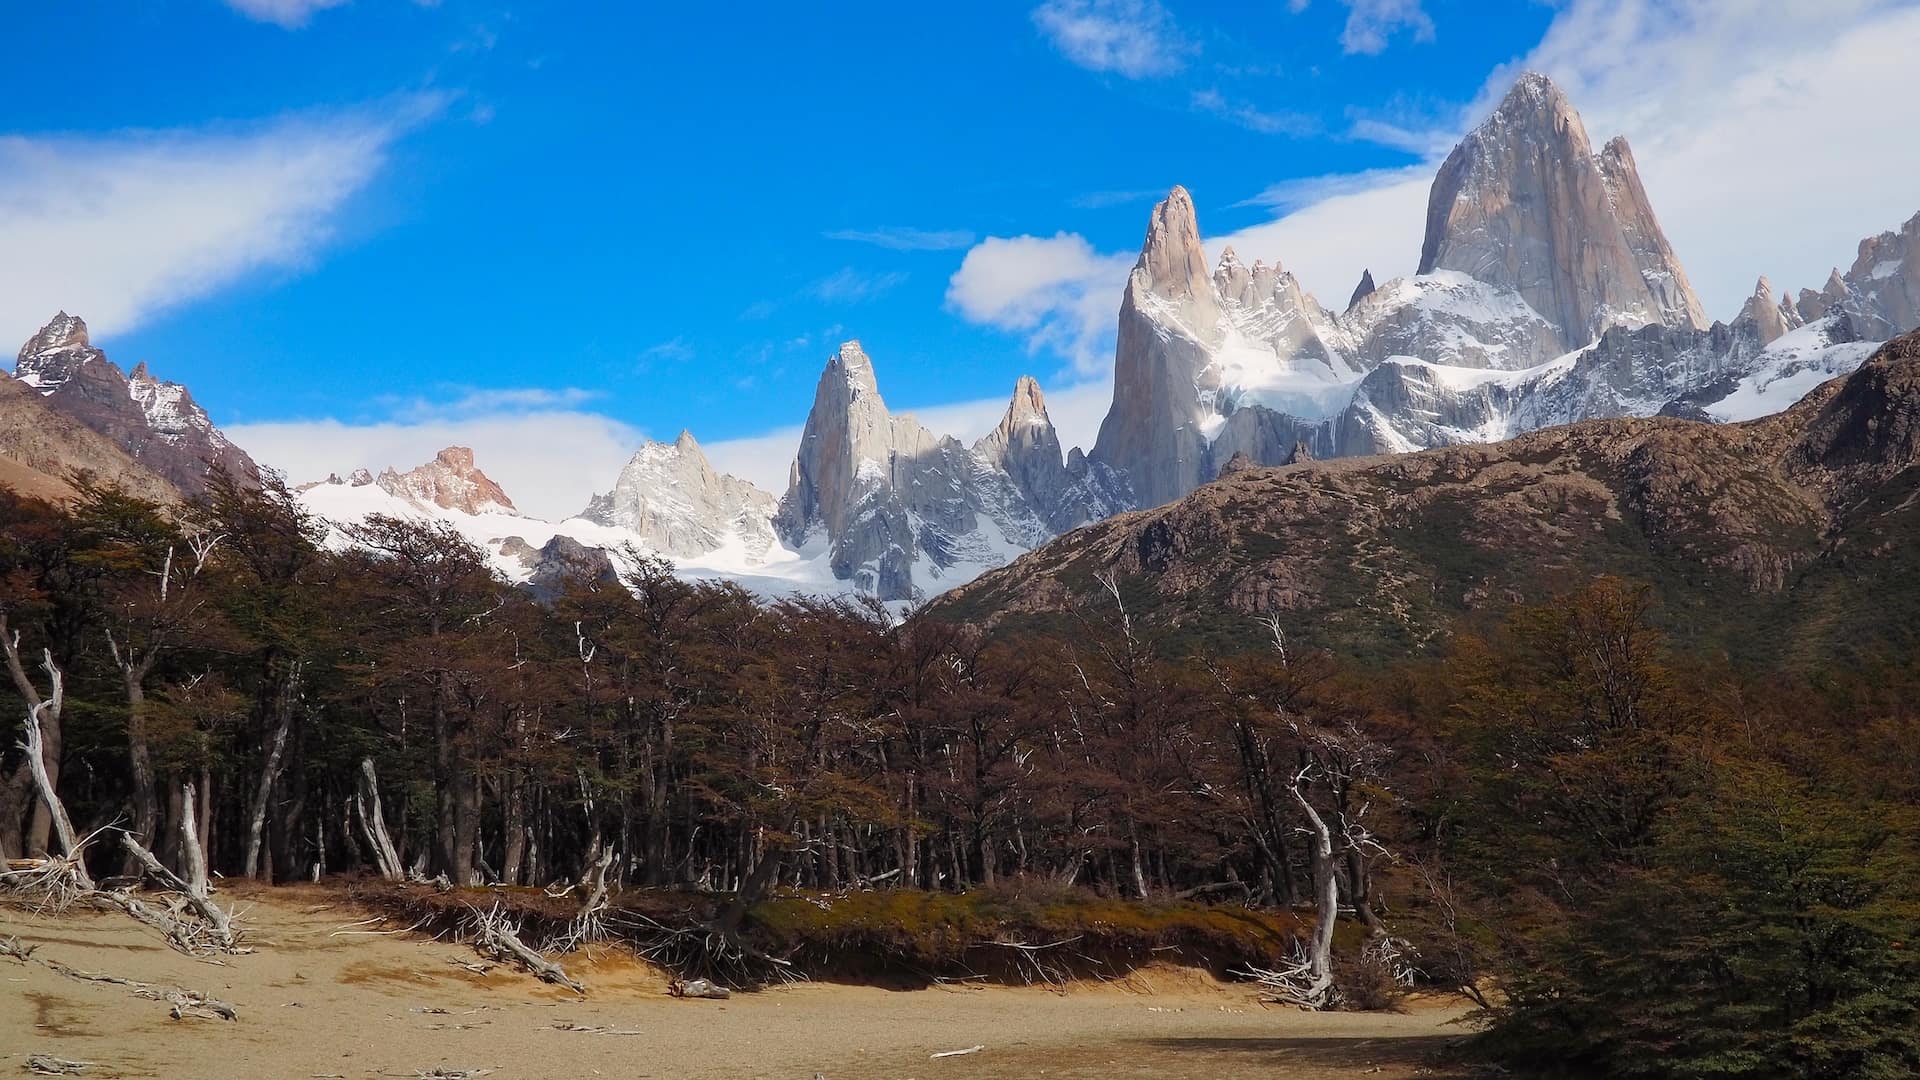 The approach to Campamento Poincenot with Mount Fitz Roy in the background